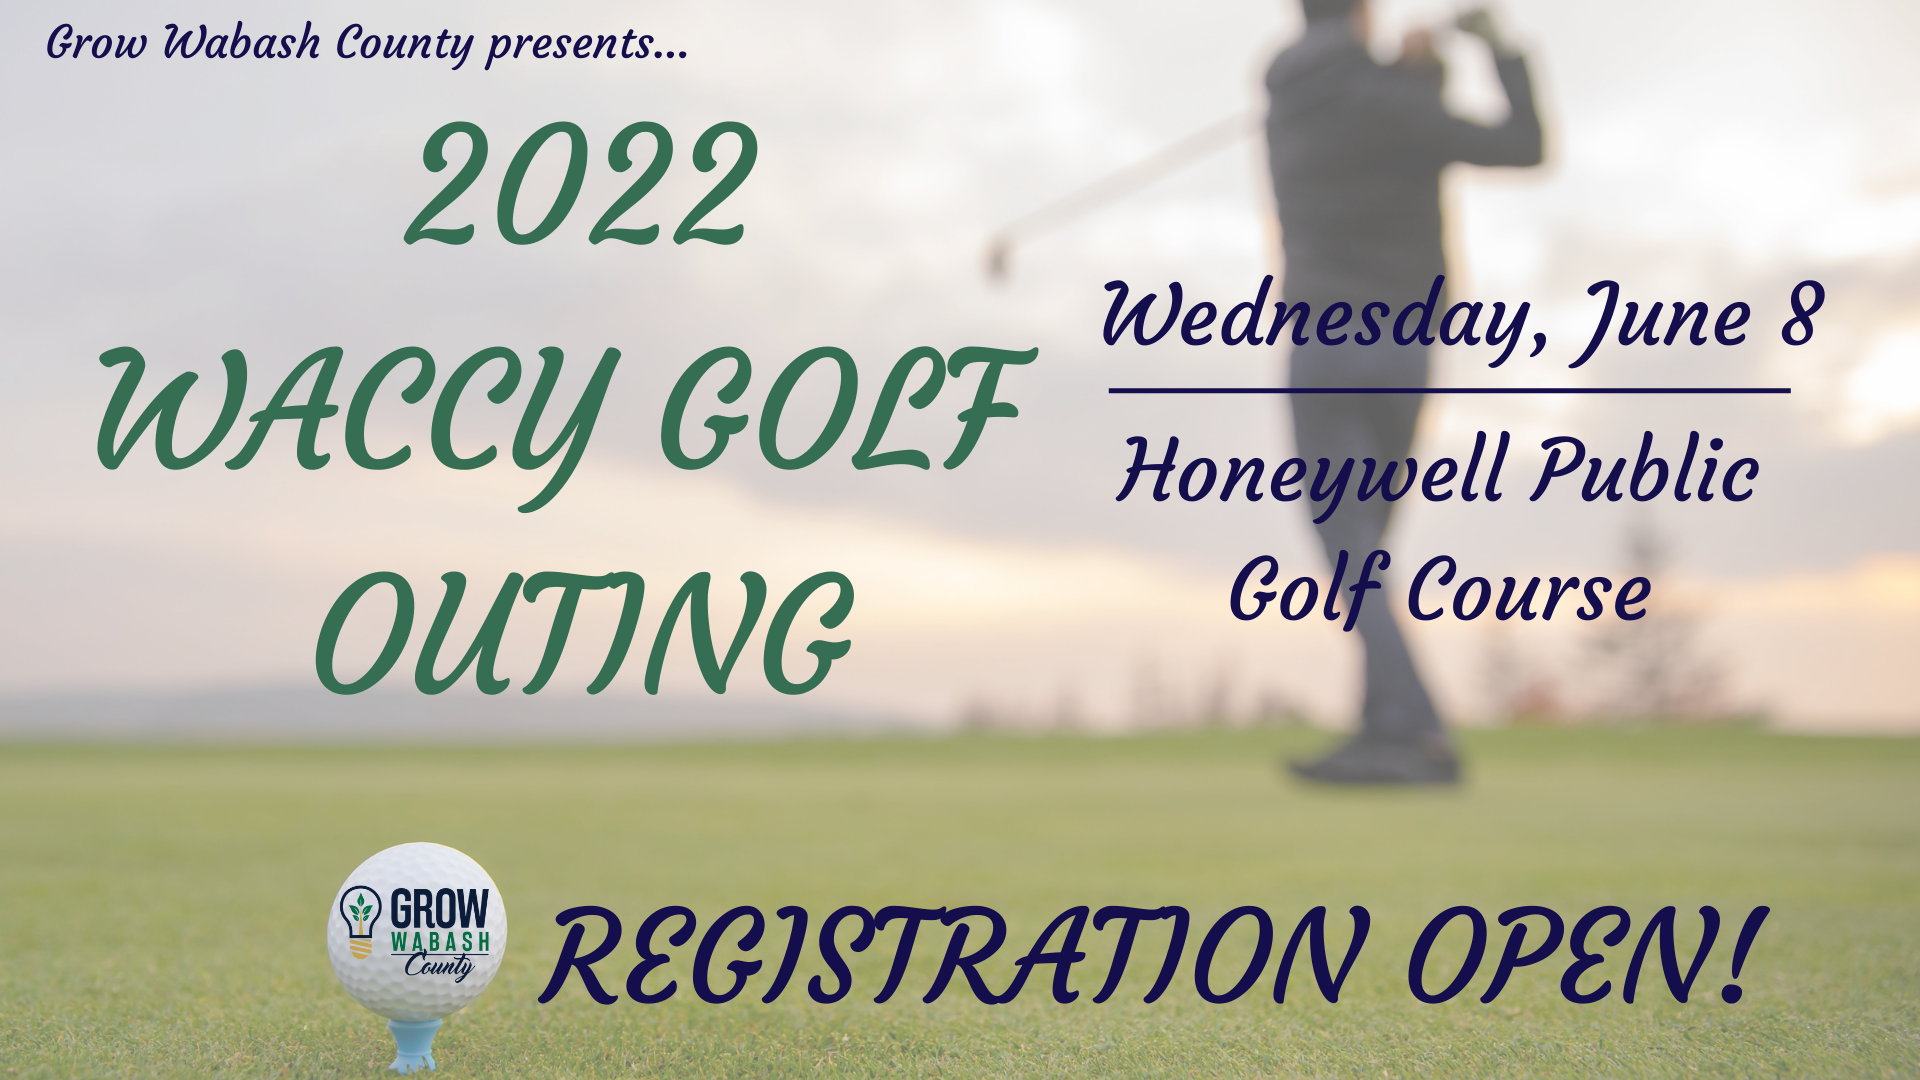 GWC WACCY Golf Outing tees off June 8 Photo